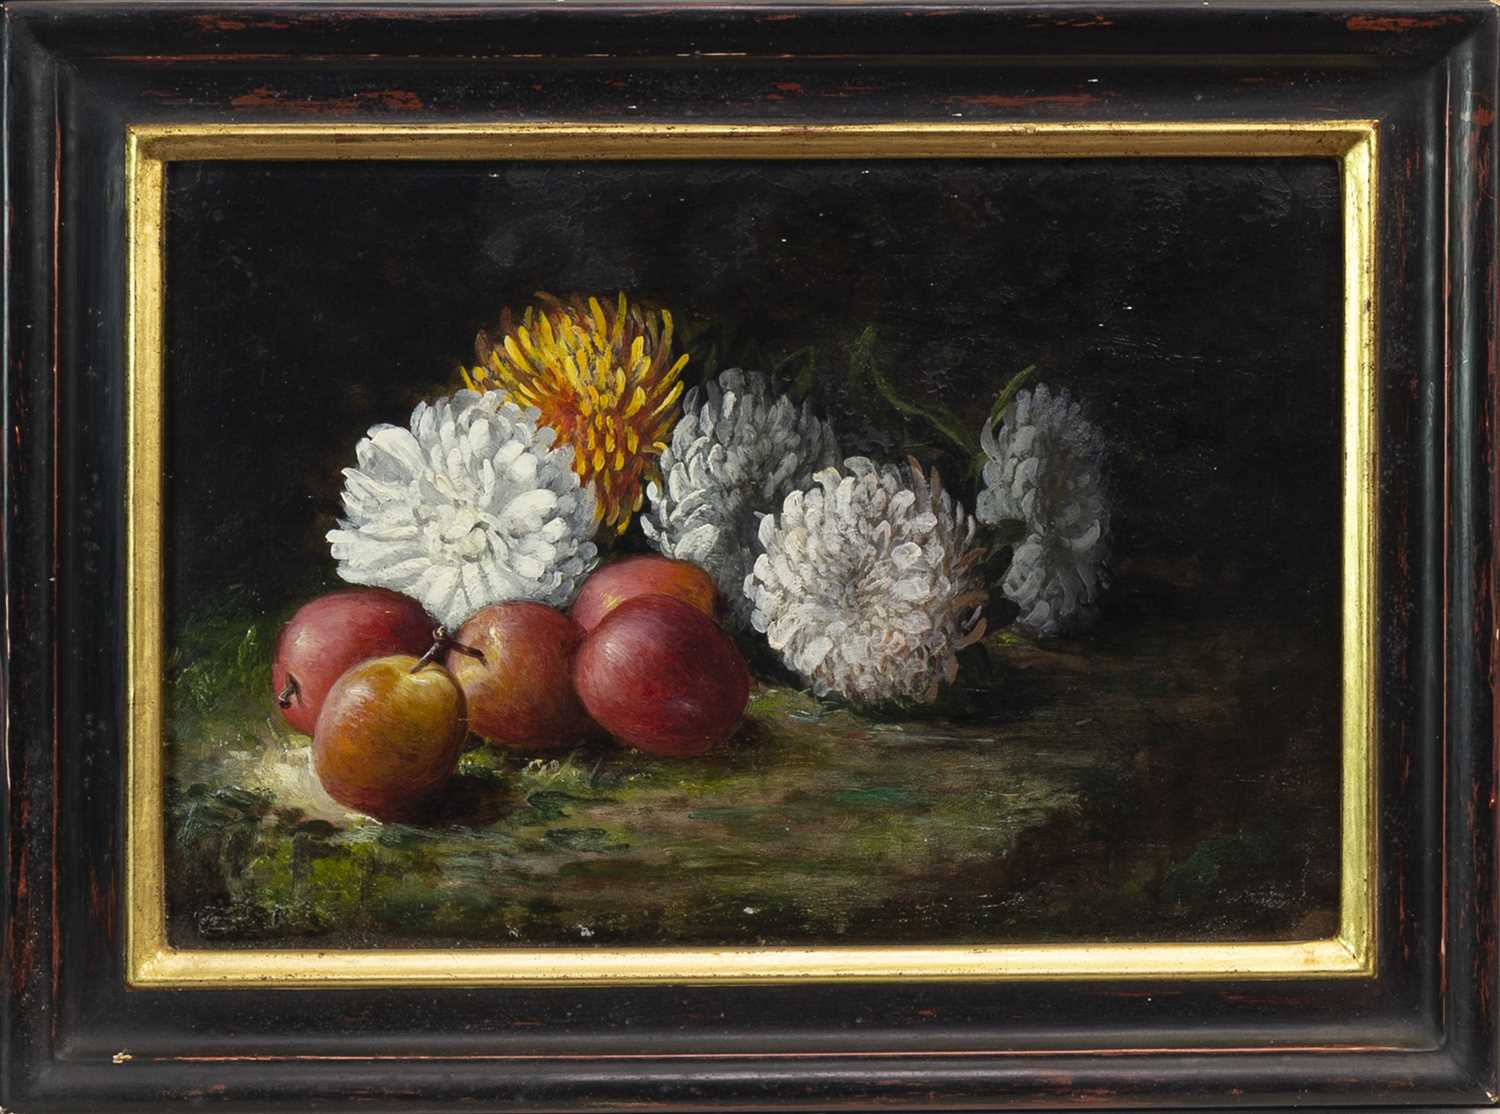 Lot 607 - CHRYSANTHEMUMS AND APPLES, AN OIL